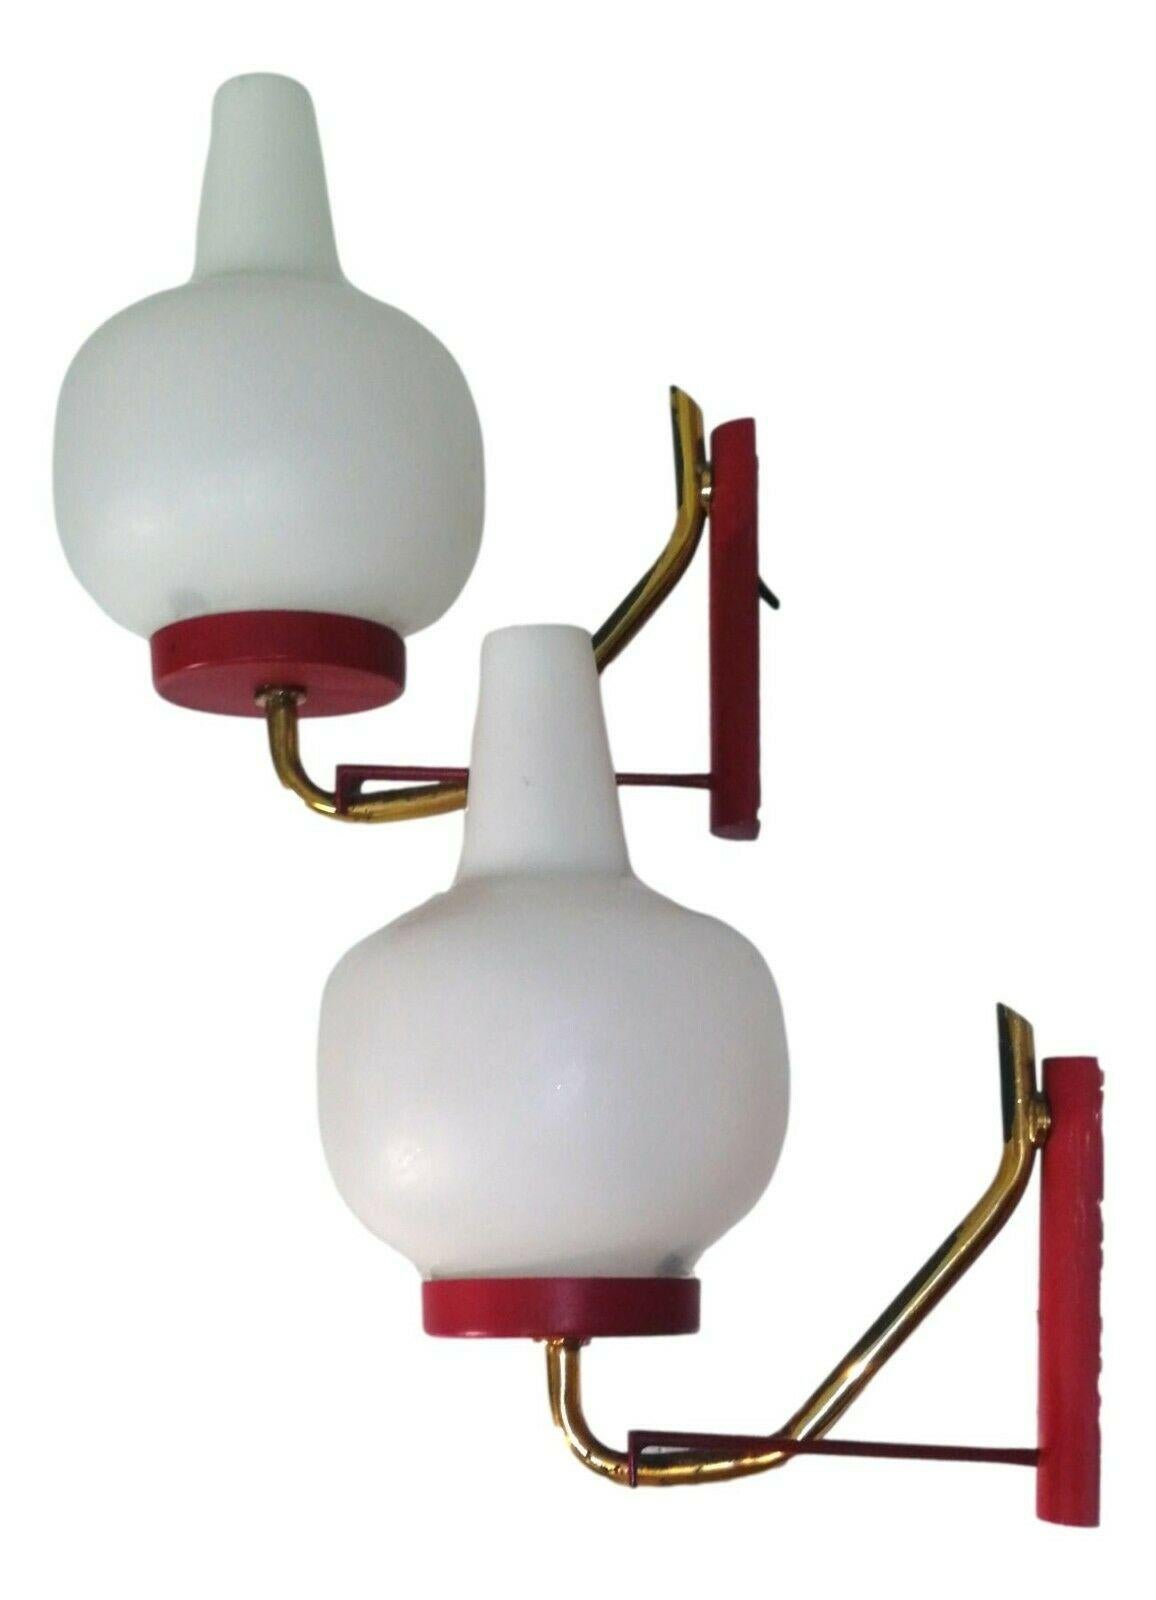 pair of original 60s wall lamps, probably produced by Stilnovo or Arredoluce, made of red lacquered metal with brass elements and blown murano diffusers 

They each measure 20 cm in height and a little less than 20 cm protrusion from the wall, in